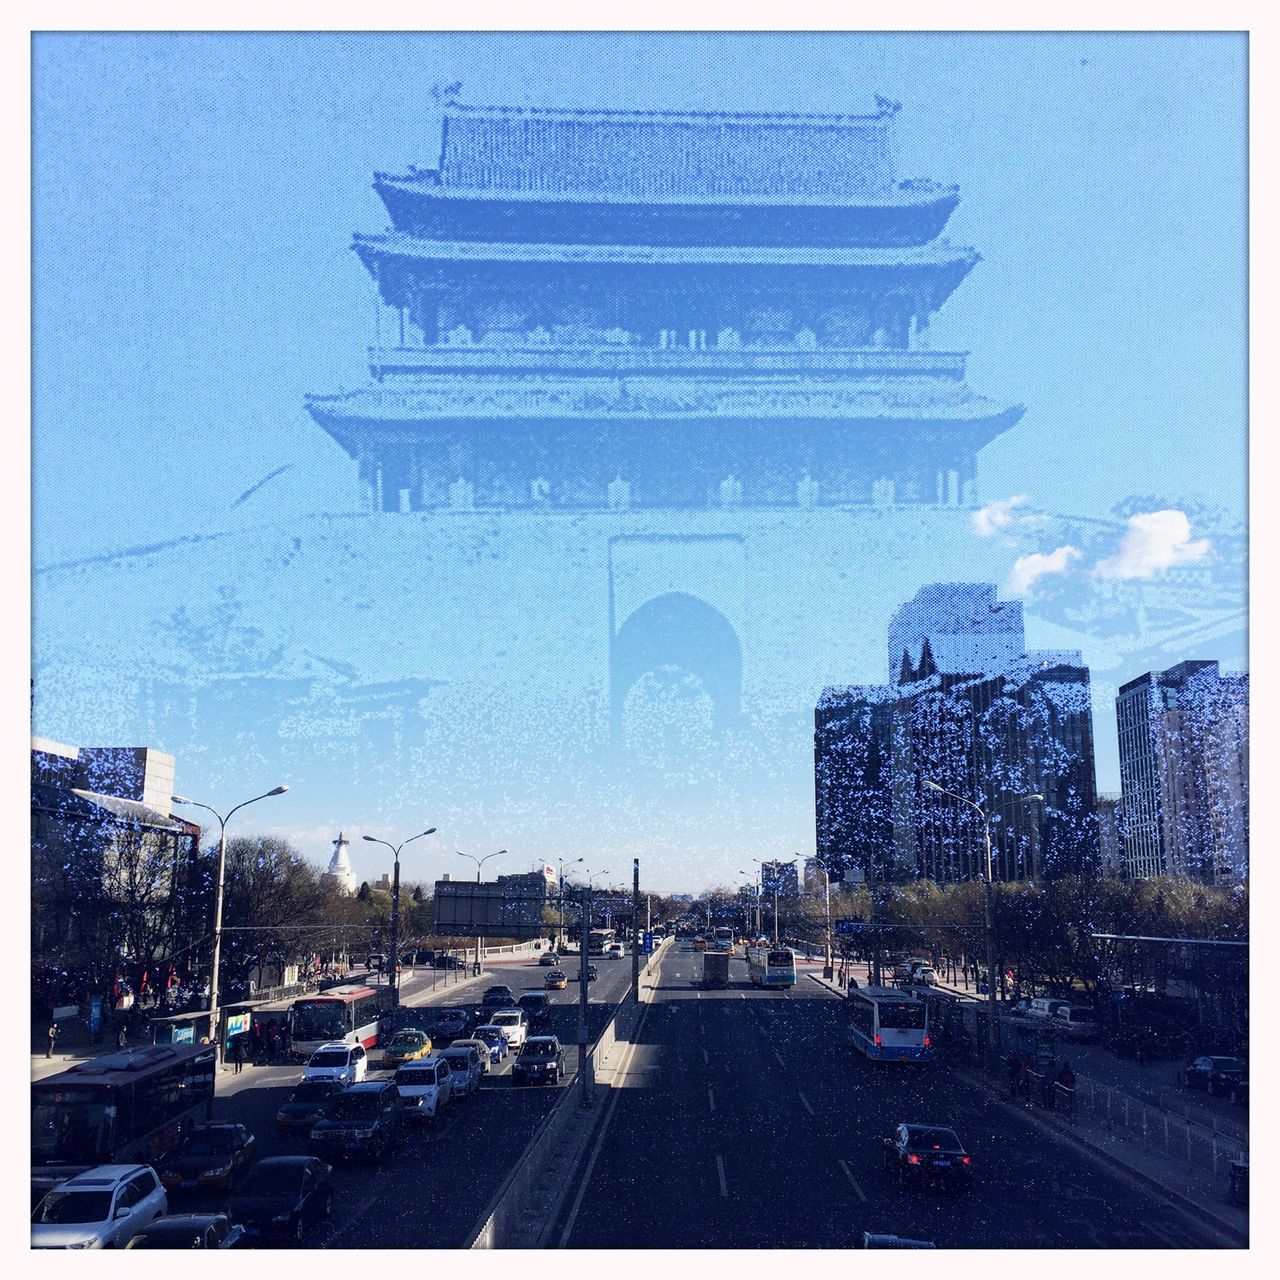 Beijing-based photographer Simon Song superimposed images of China's ancient monuments onto images of modern-day Beijing to show where the structures would have been had they not been demolished.The Fuchengmen Gate Tower, which was destroyed in 1965, is superimposed on an image of Fuchengmen area, now home to many restaurants and shops.